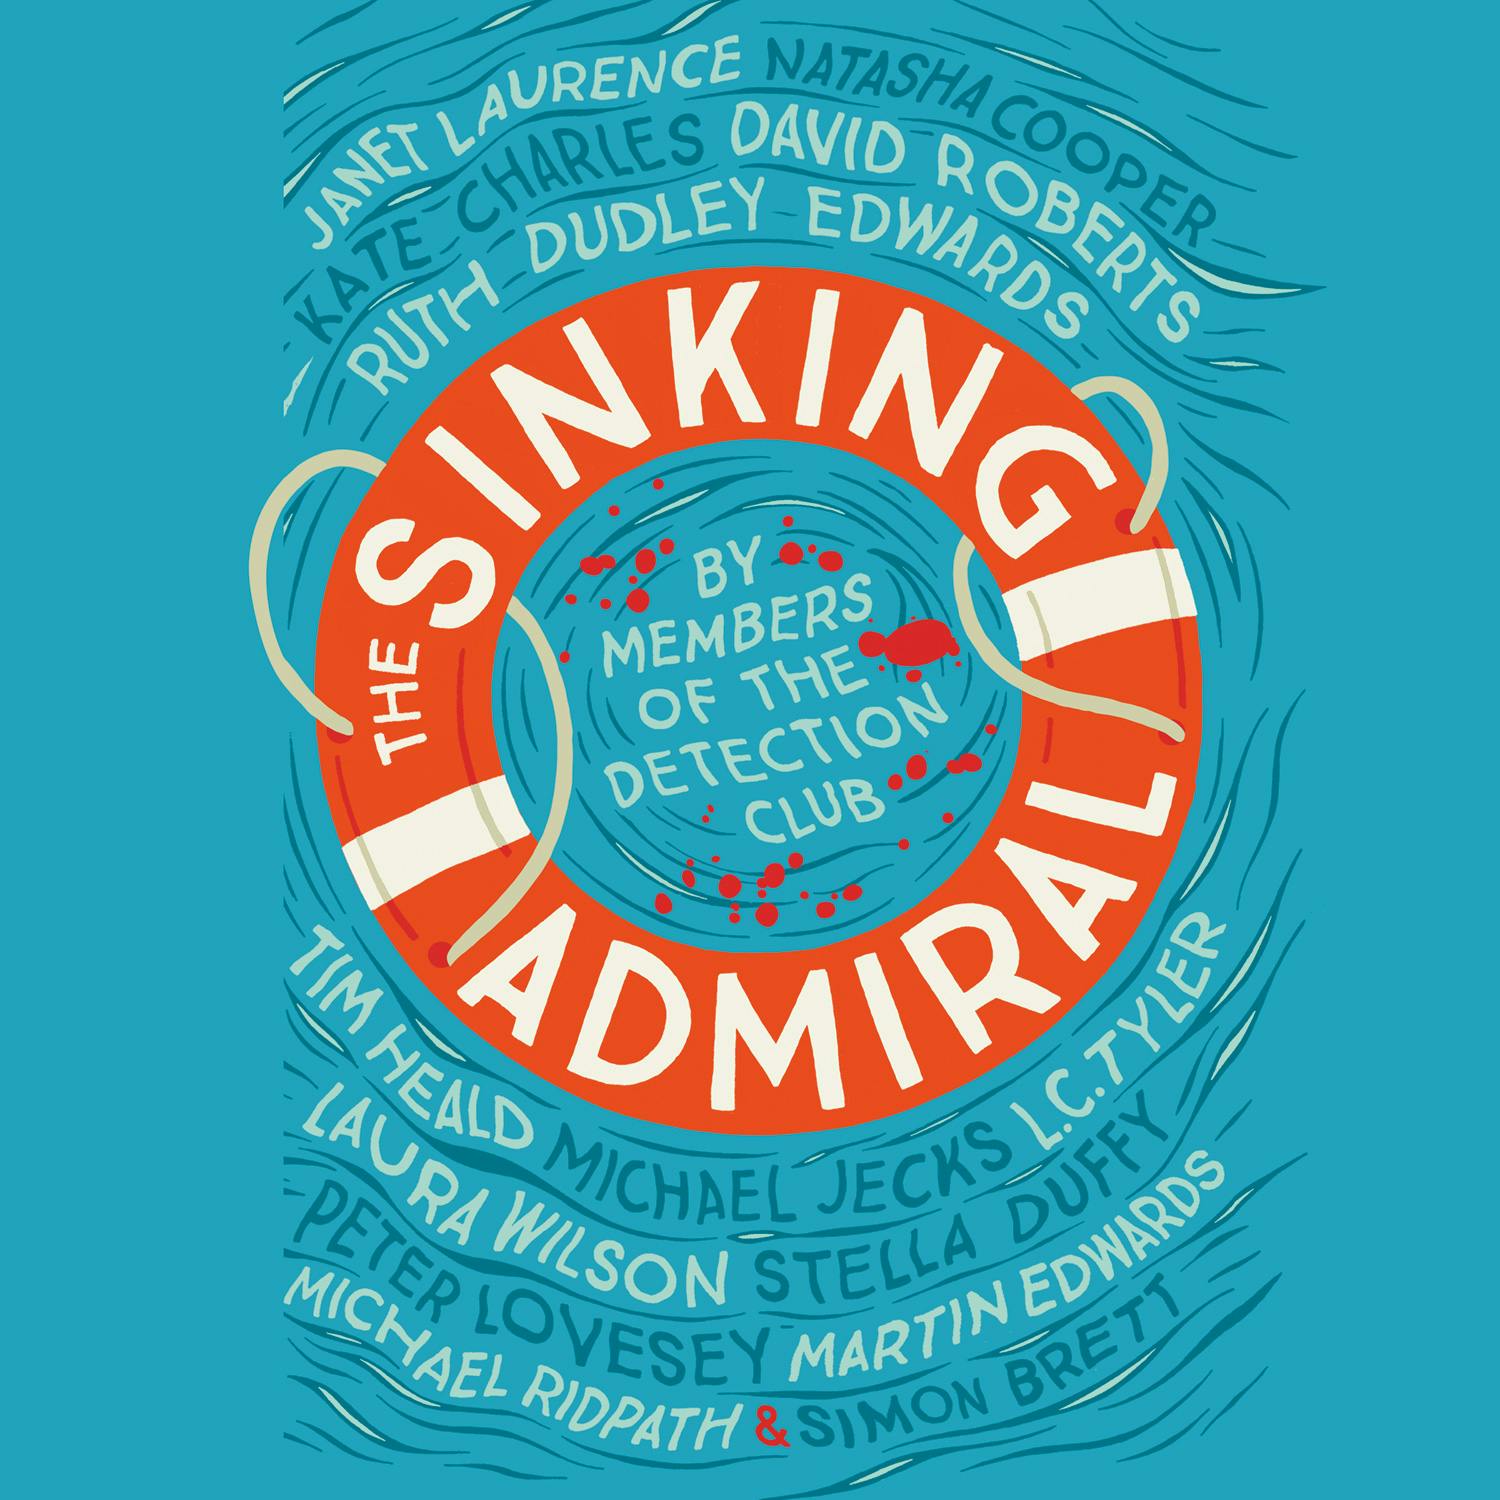 The Sinking Admiral - undefined